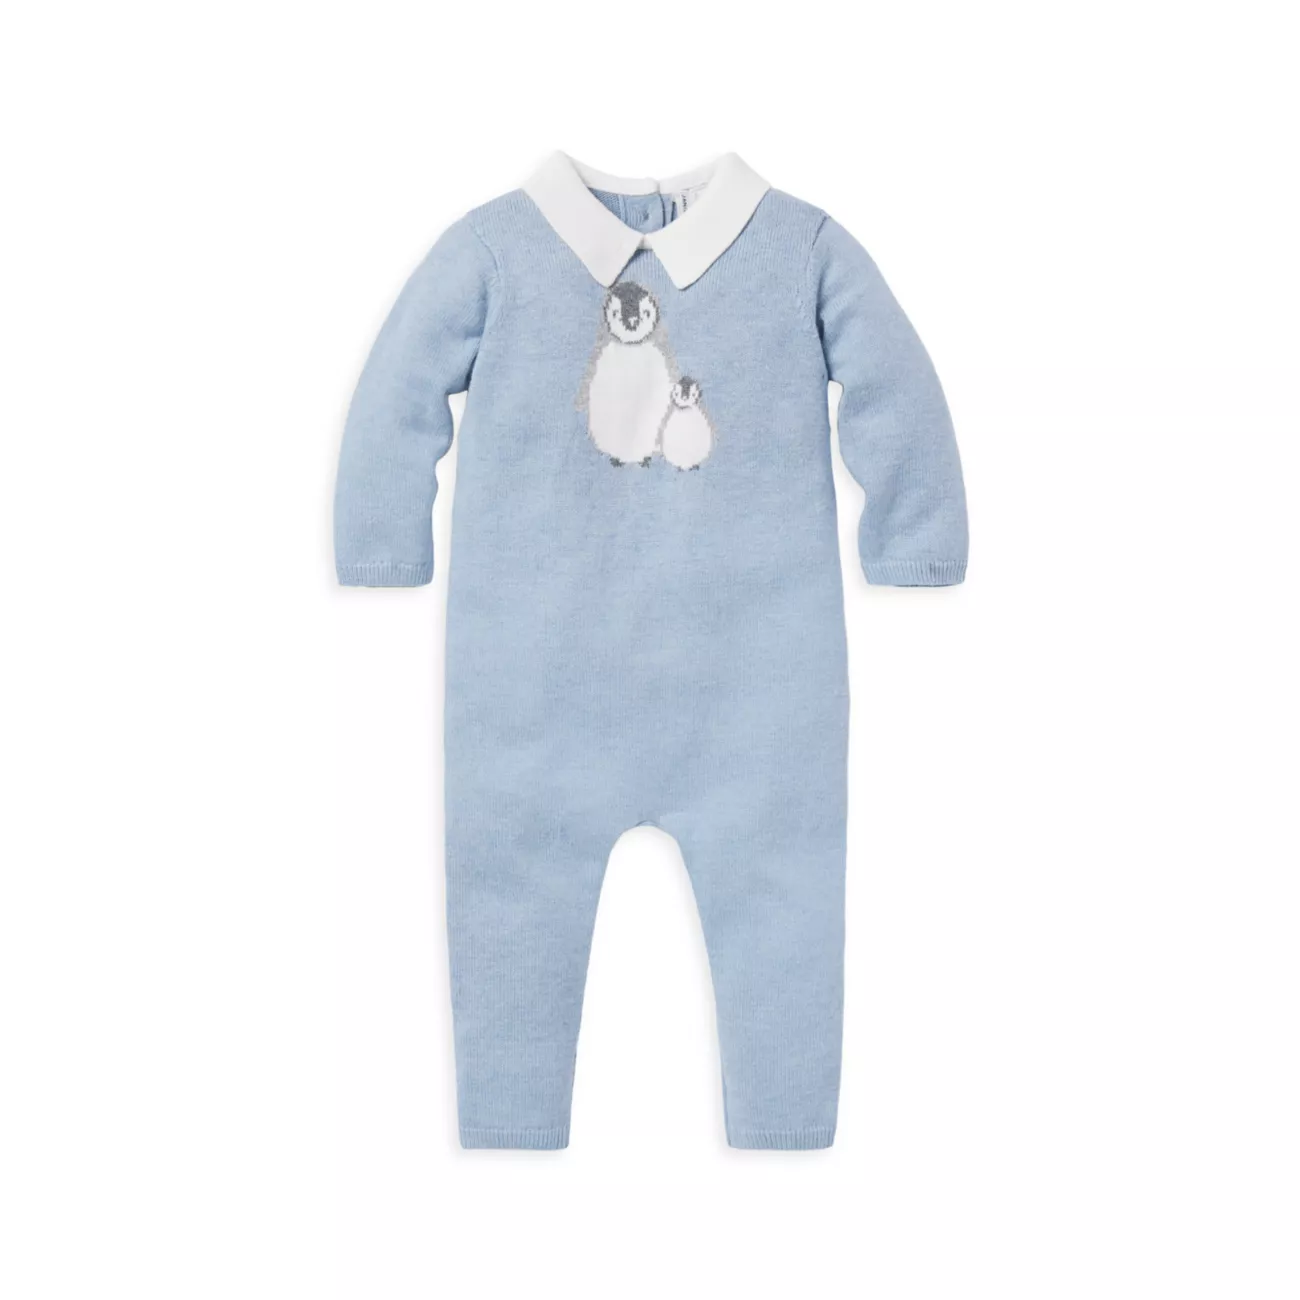 Baby Boy's Penguin Collared Coveralls Janie and Jack